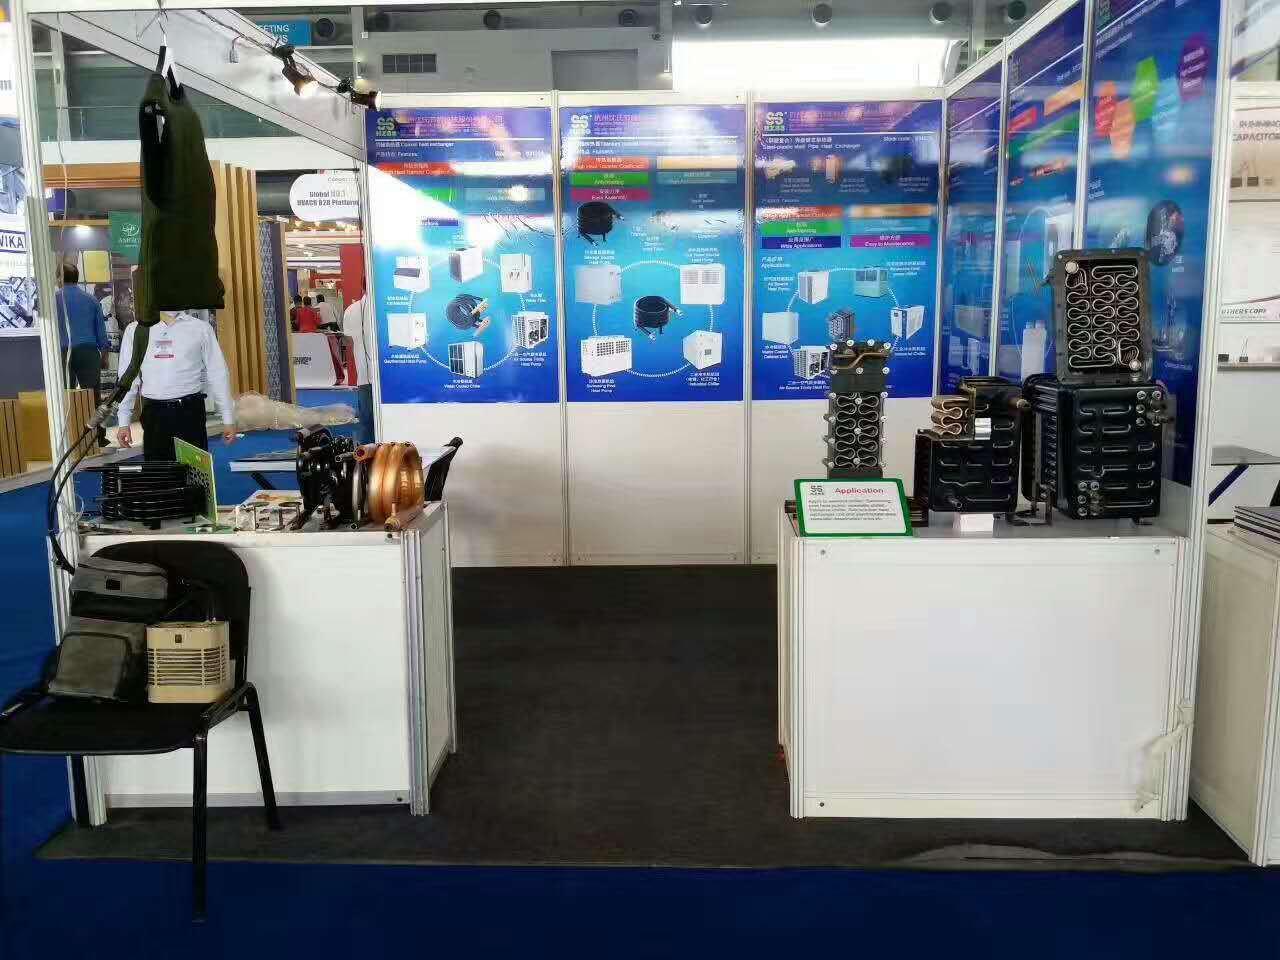 HZSS Exhibition in Pakistan Finished Perfectly